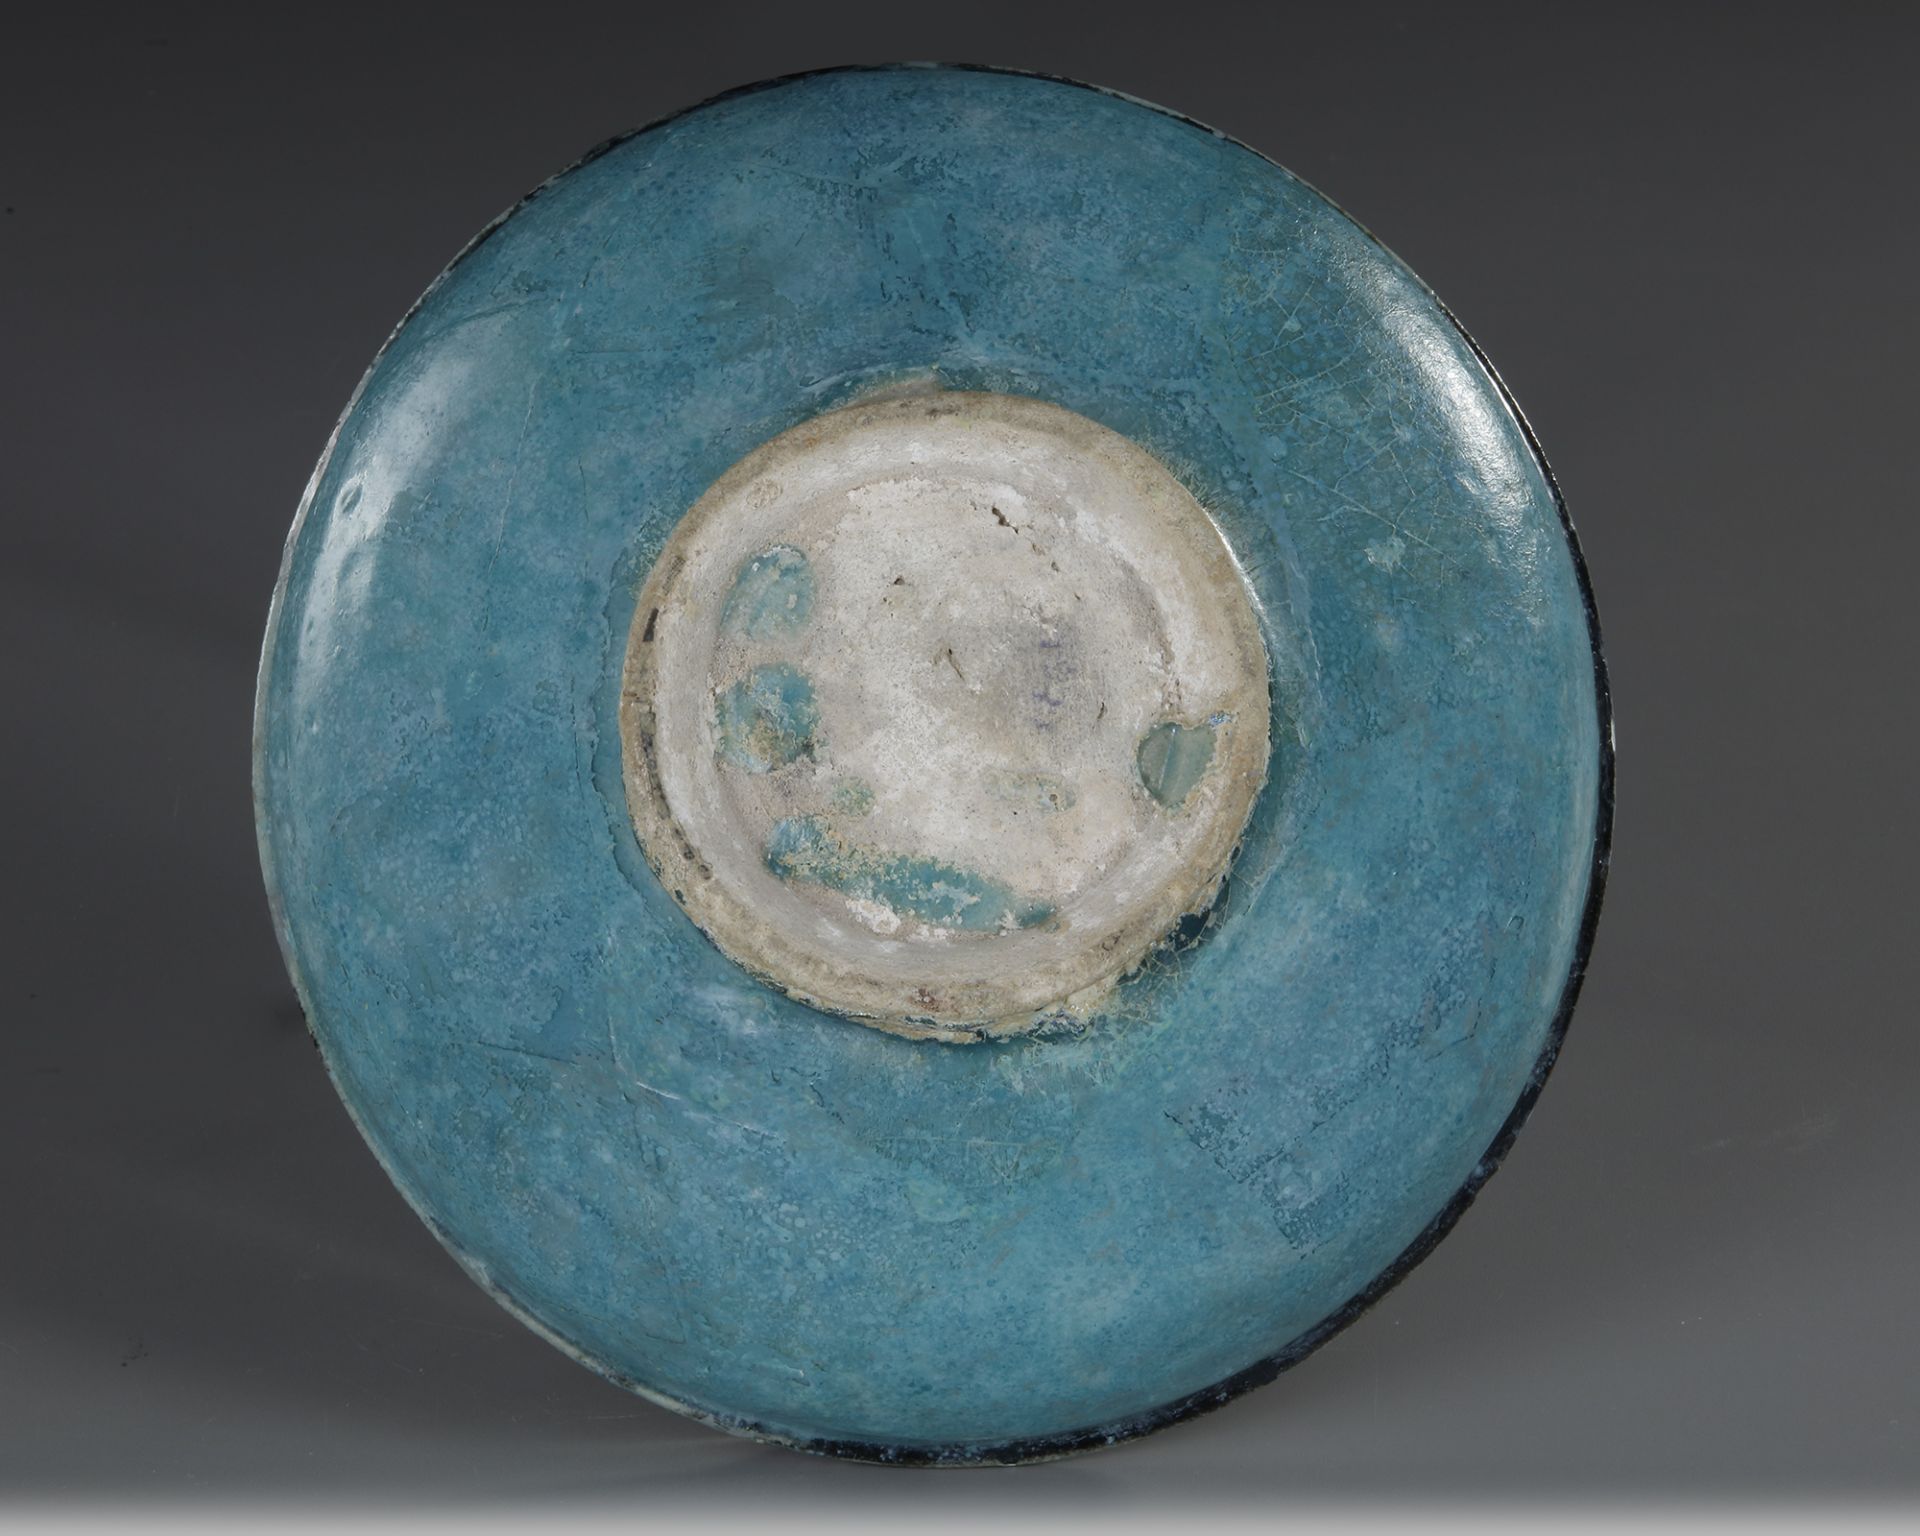 A BLACK AND TURQUOISE GLAZED KASHAN BOWL, PERSIA, 13TH CENTURY - Image 7 of 8